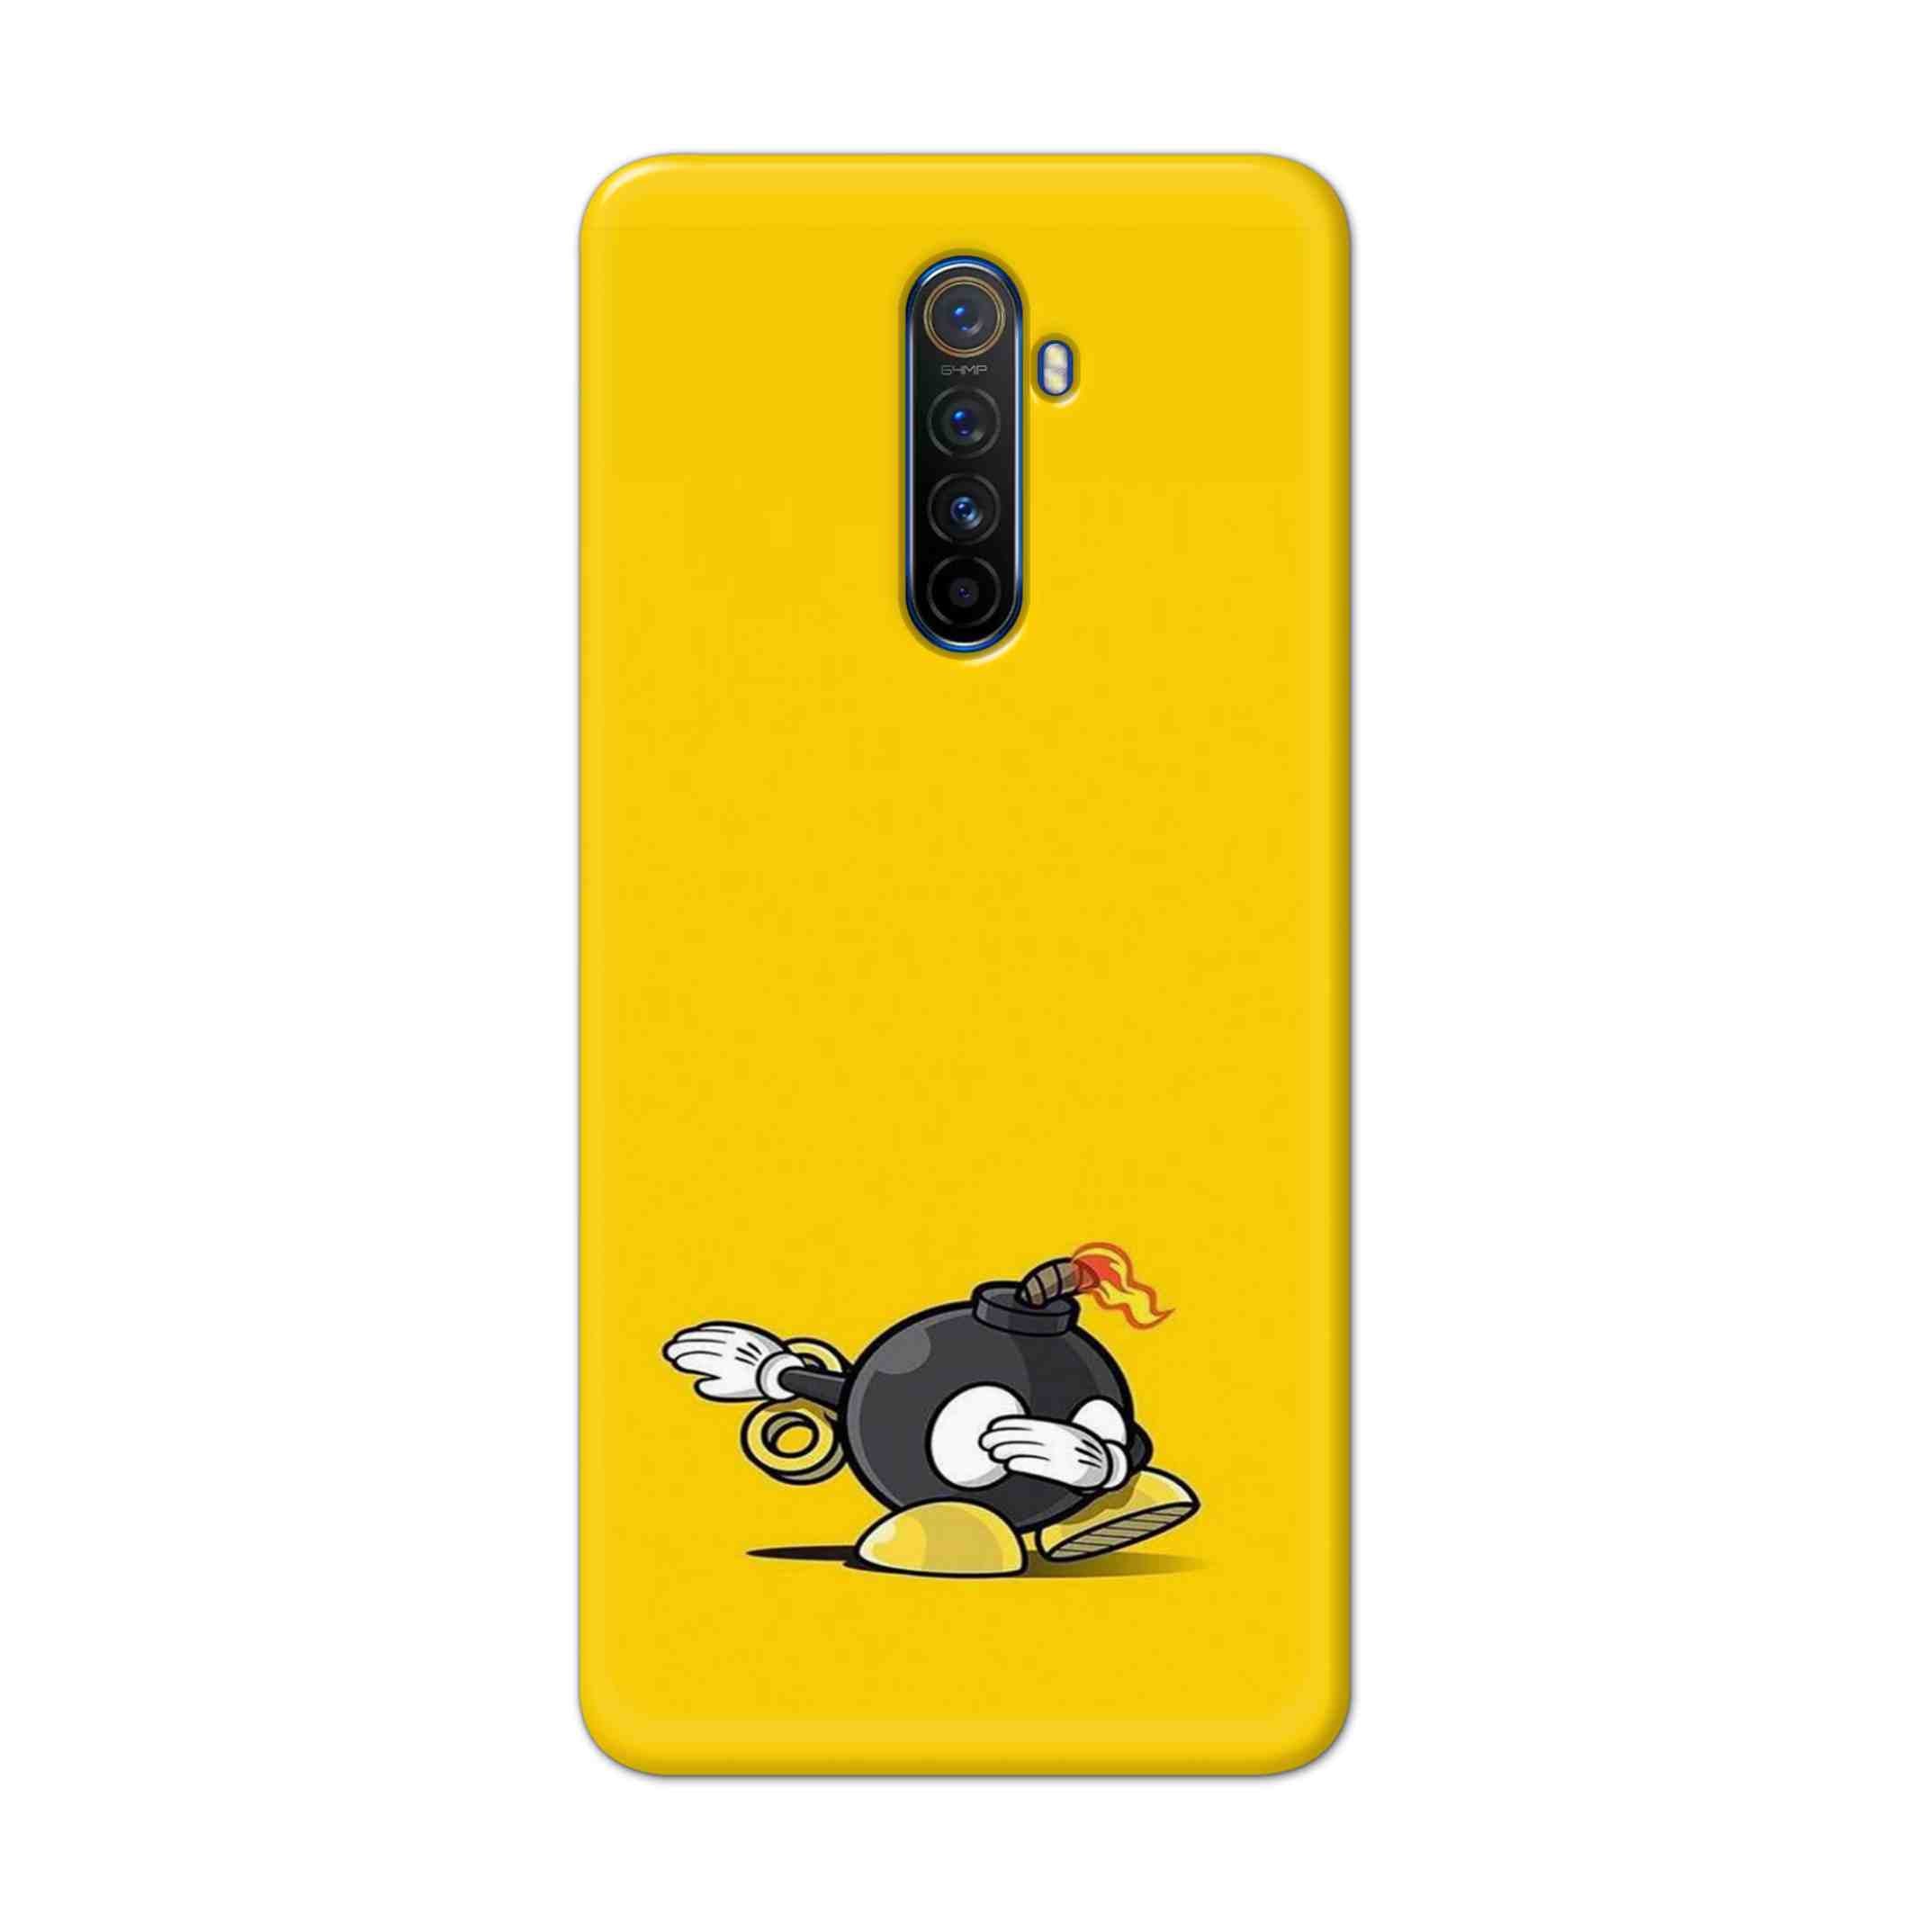 Buy Dashing Bomb Hard Back Mobile Phone Case Cover For Realme X2 Pro Online